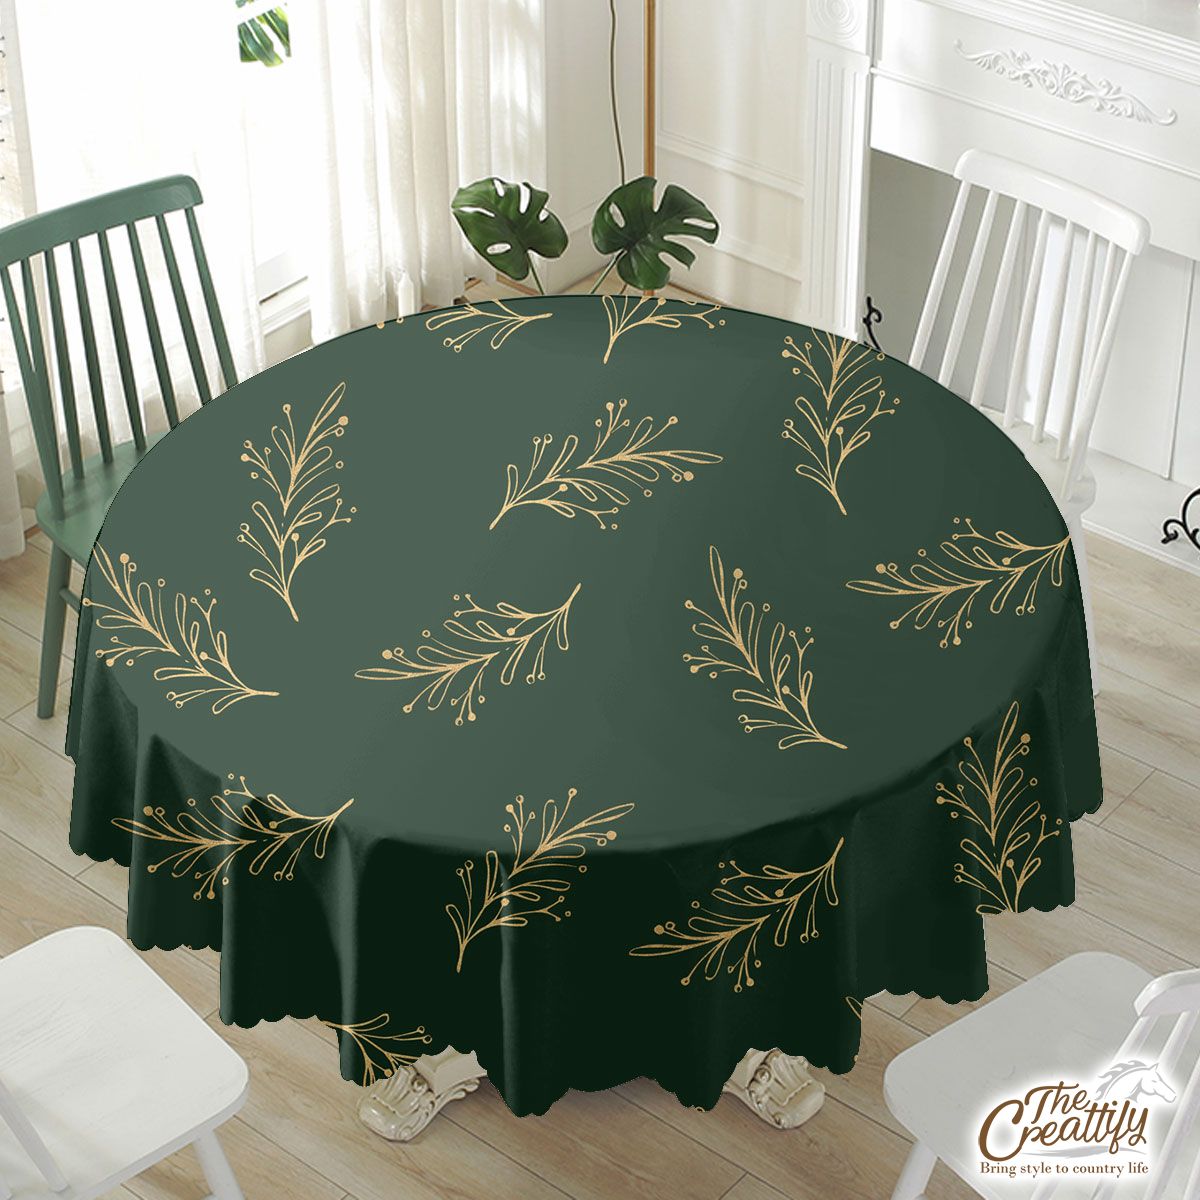 Gold And Green Christmas Tree Branch Waterproof Tablecloth